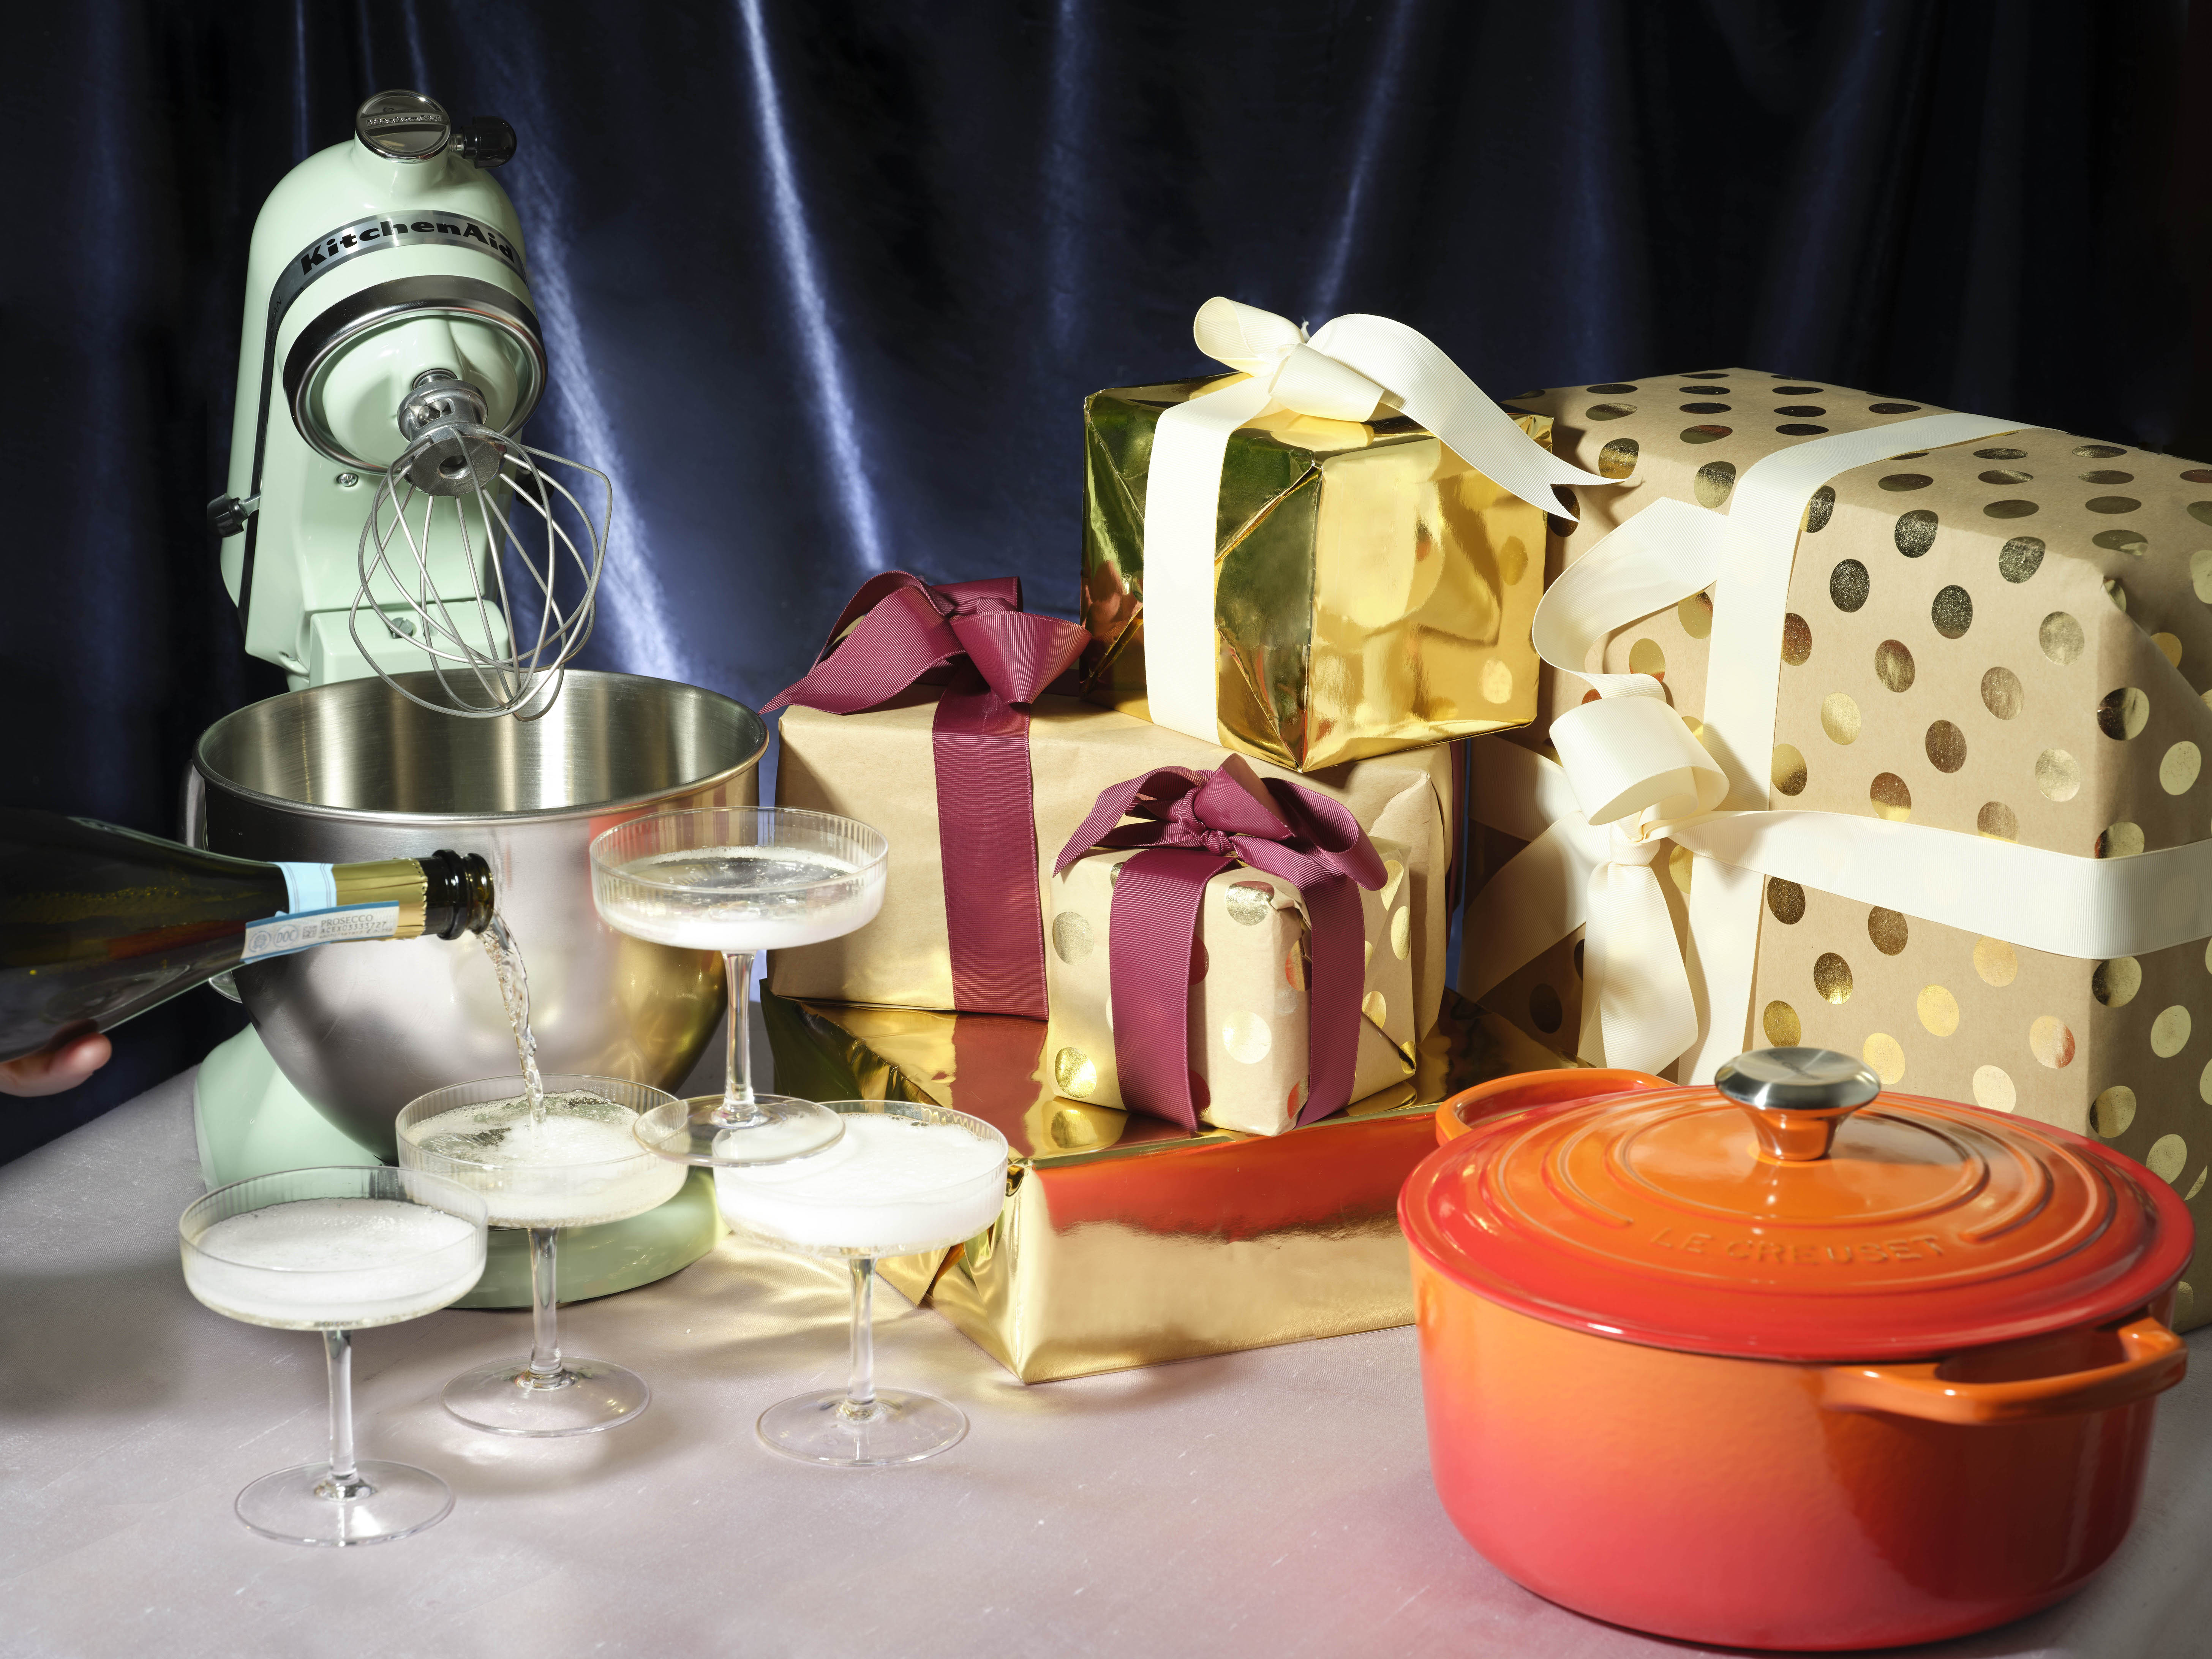 A table with wrapped gifts, along with a KitchenAid mixer, Le Creuset Dutch oven, and four full Champagne coupes.